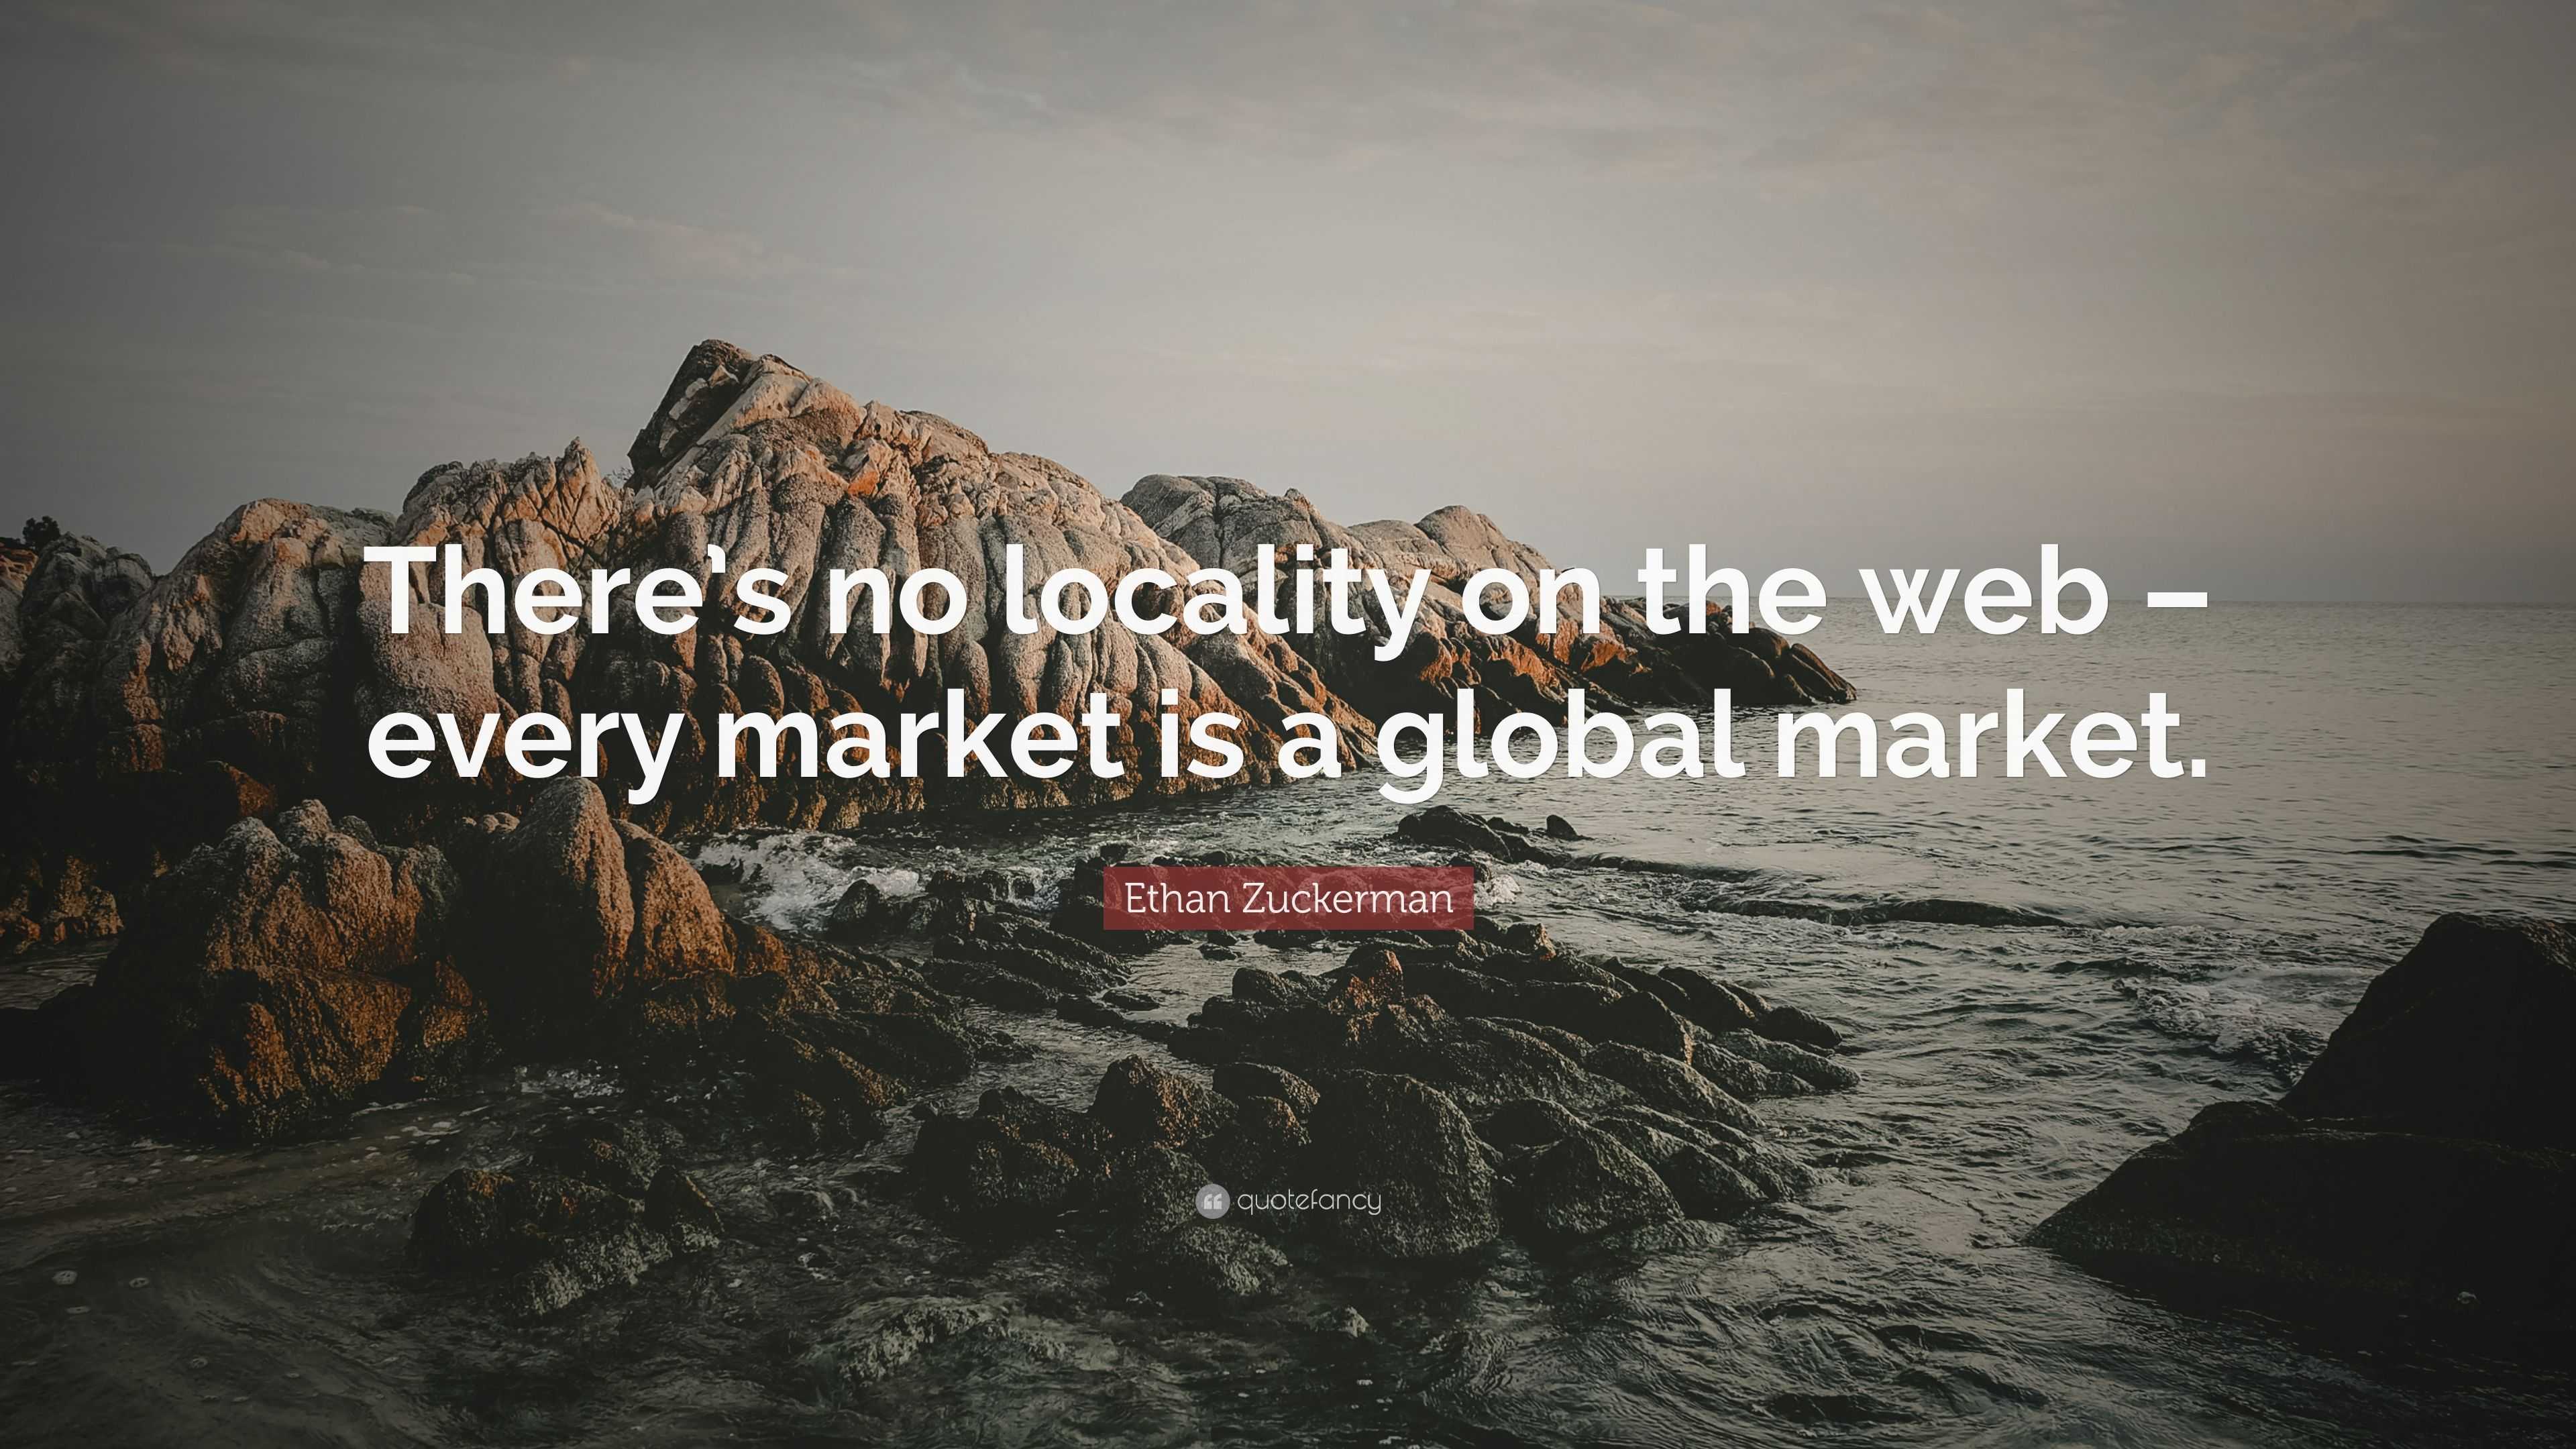 Ethan Zuckerman Quote: “There's no locality on the web – every market is a  global market.”